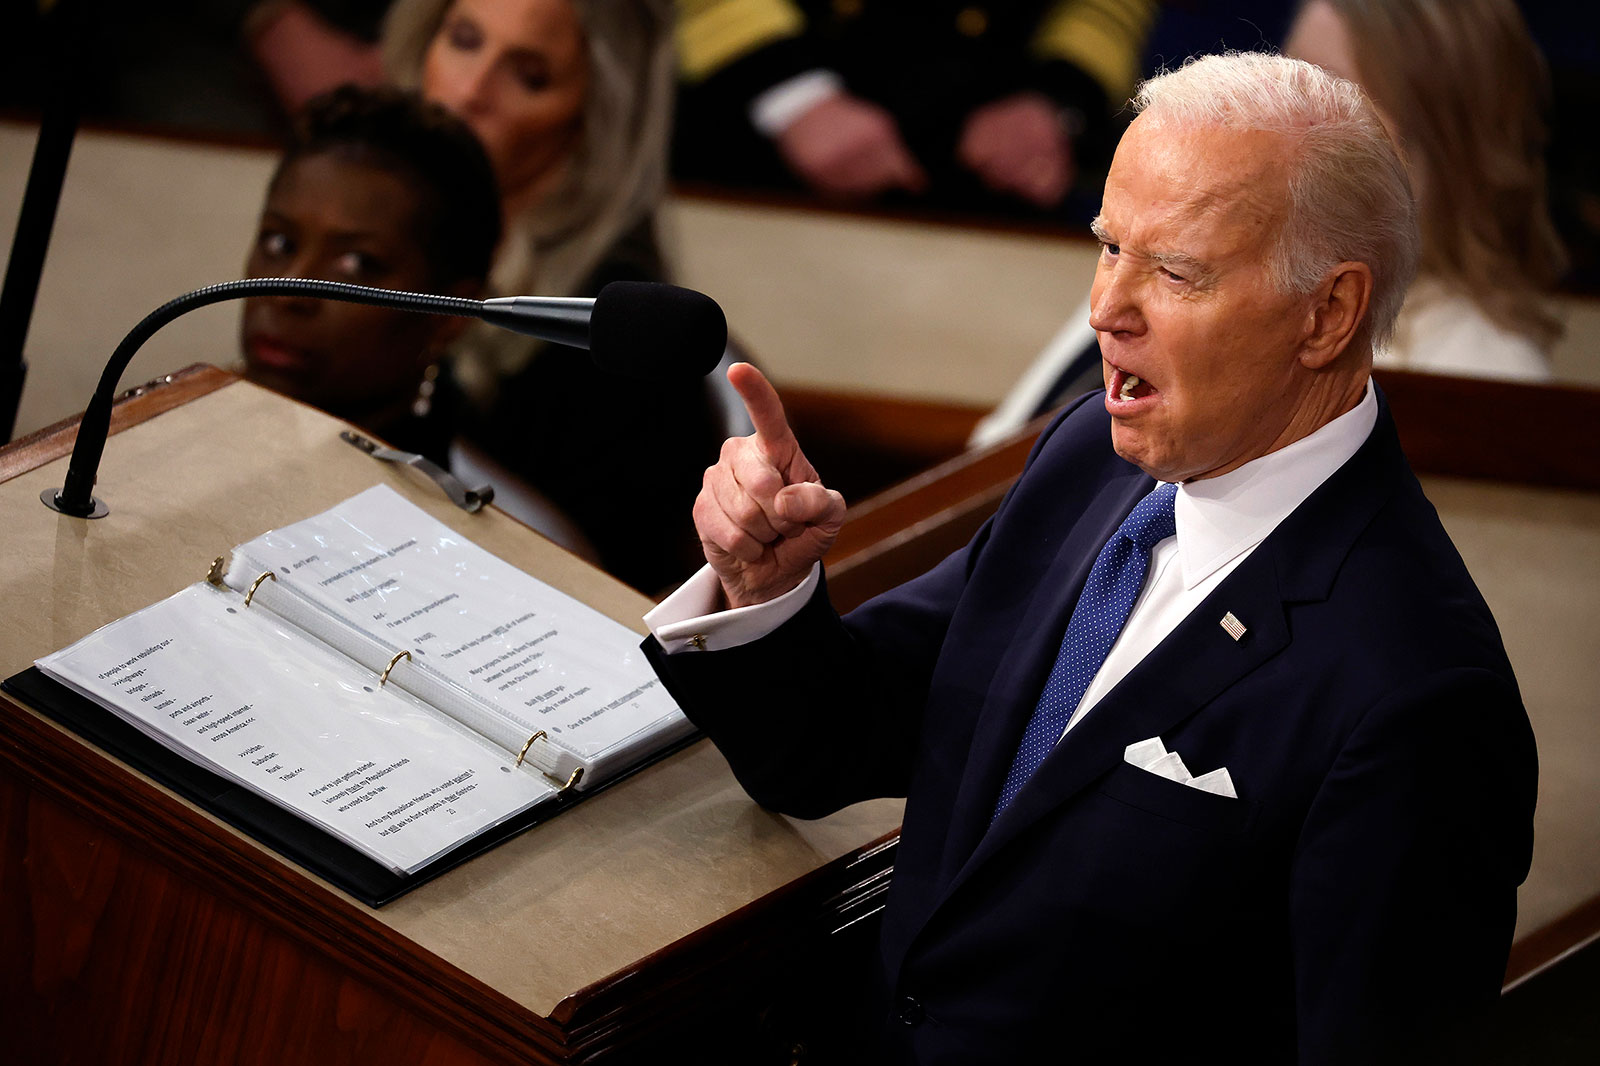 President Biden delivers his State of the Union address on Tuesday night.